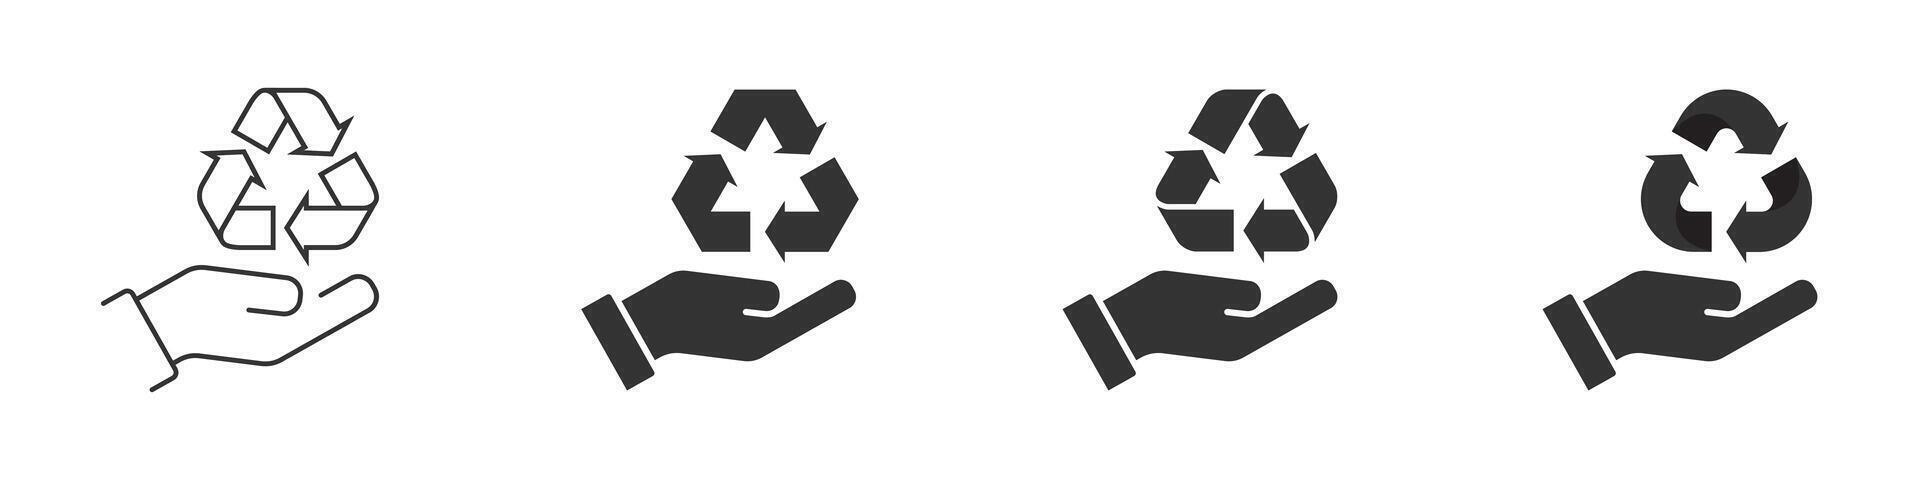 Hand holding recycling symbol. Recycle icon set. Flat vector illustration.